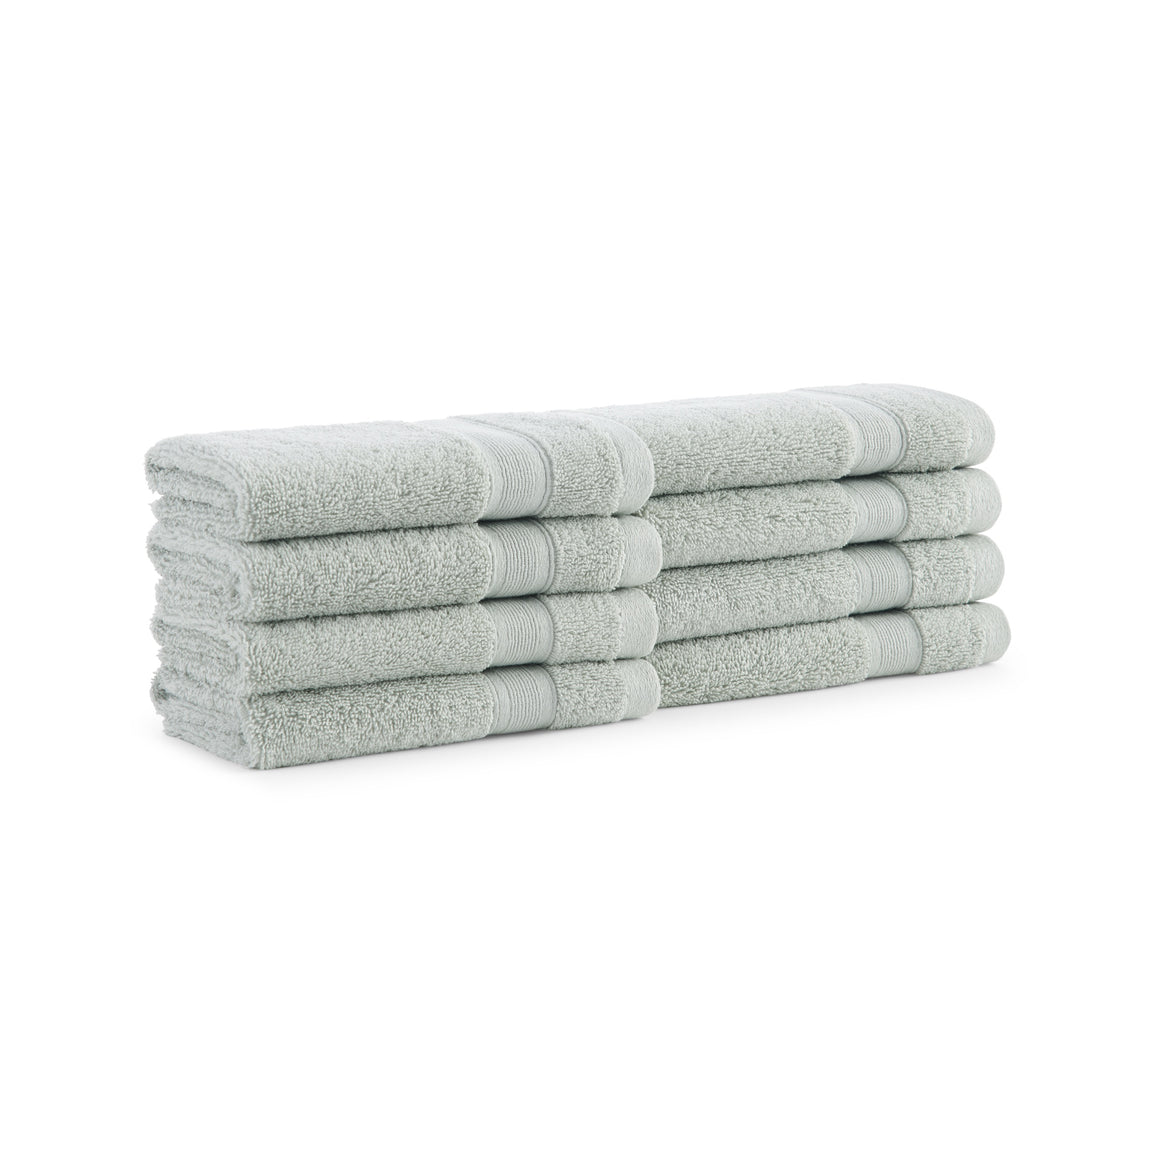 Aston and Arden Luxury Turkish Hand Towels, 4-Pack, 600 gsm, Extra Soft Plush, 18x32, Solid Color options with Dobby Border - White